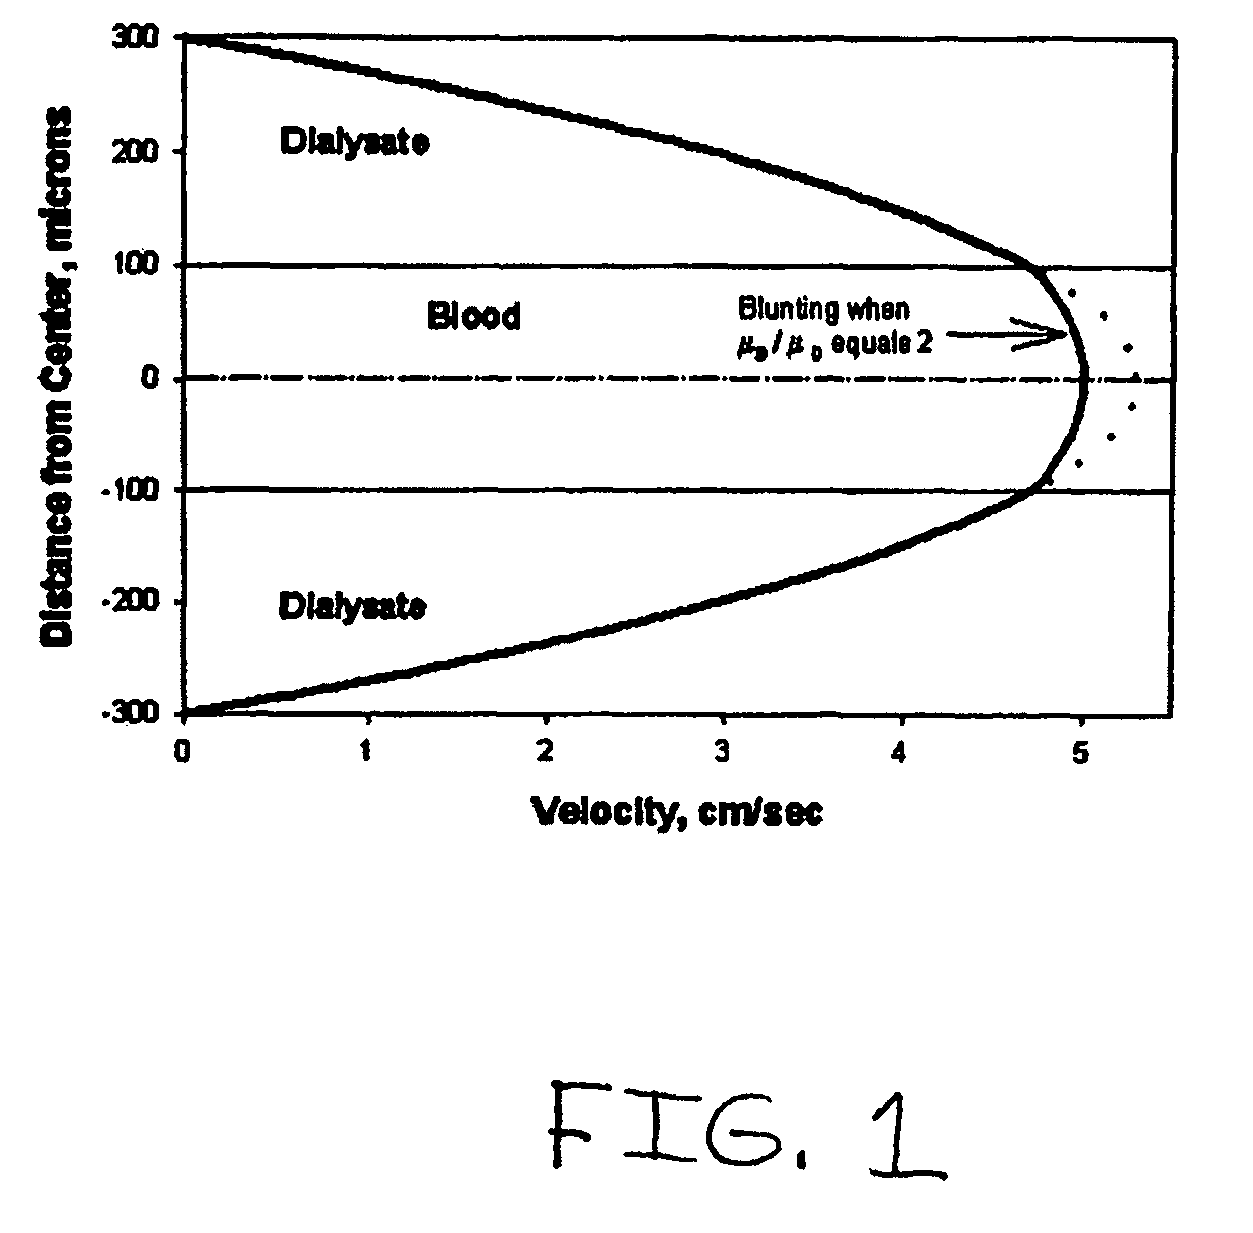 Systems and methods of blood-based therapies having a microfluidic membraneless exchange device